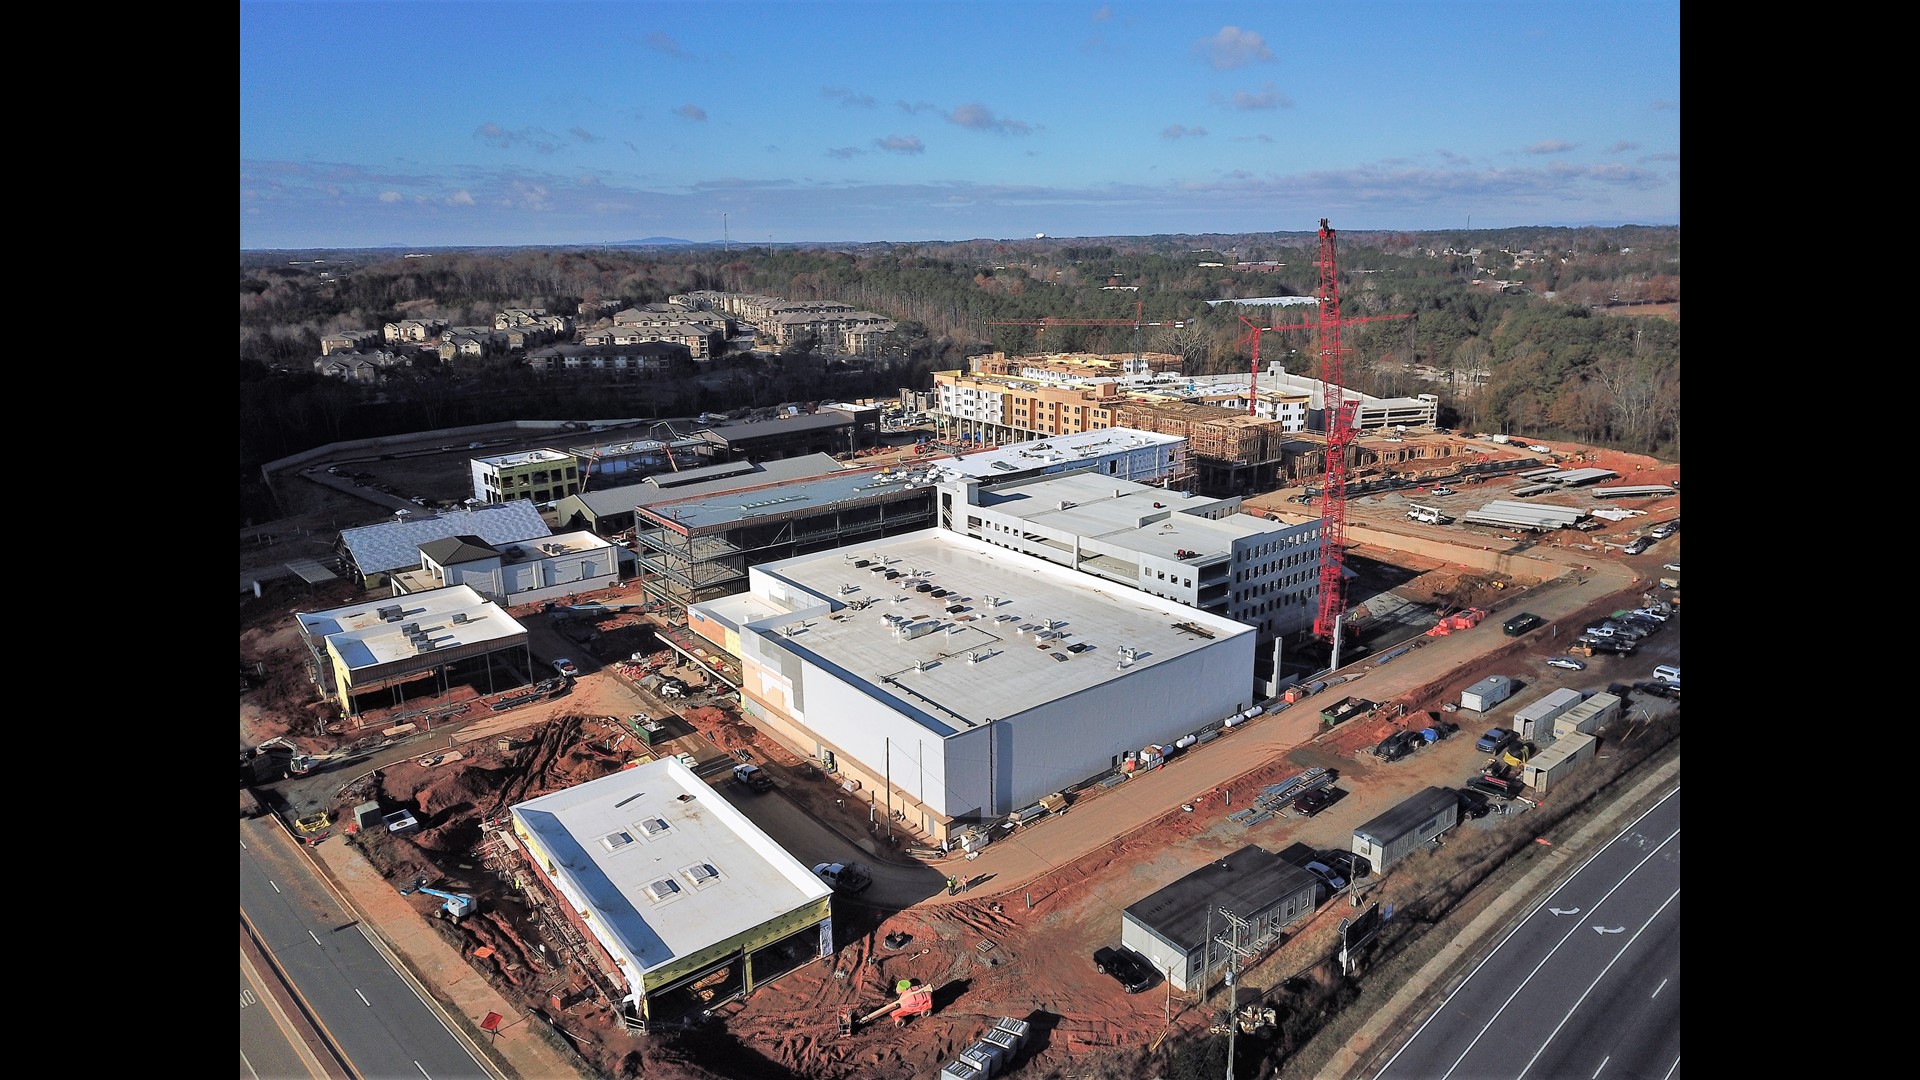 11Alive got a tour of HALCYON, Forsyth County's multi-million dollar mixed-use facility.